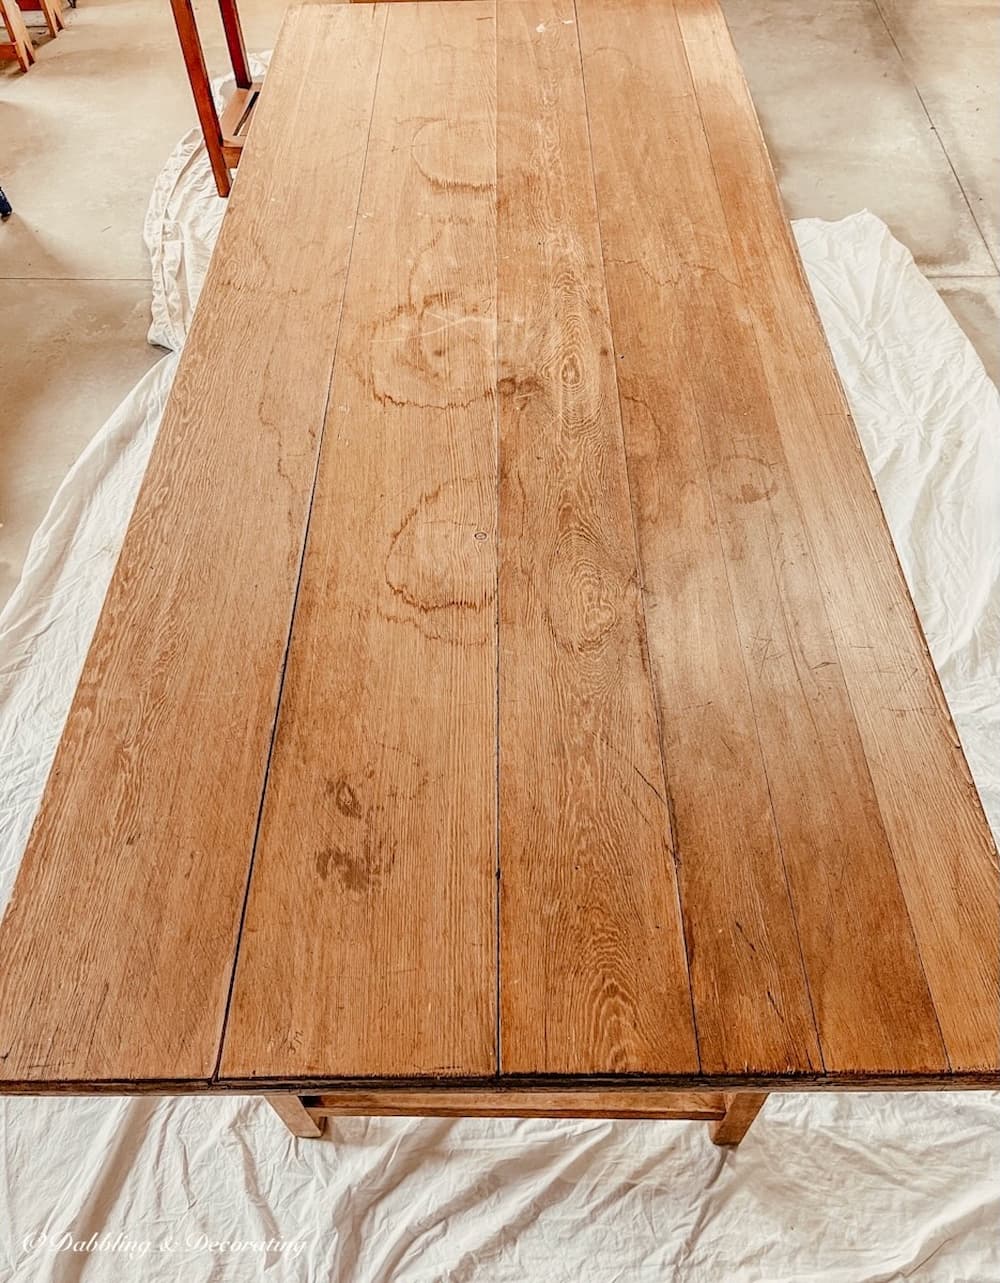 How to Refinish a Wood Table in Less Than 1 Hour